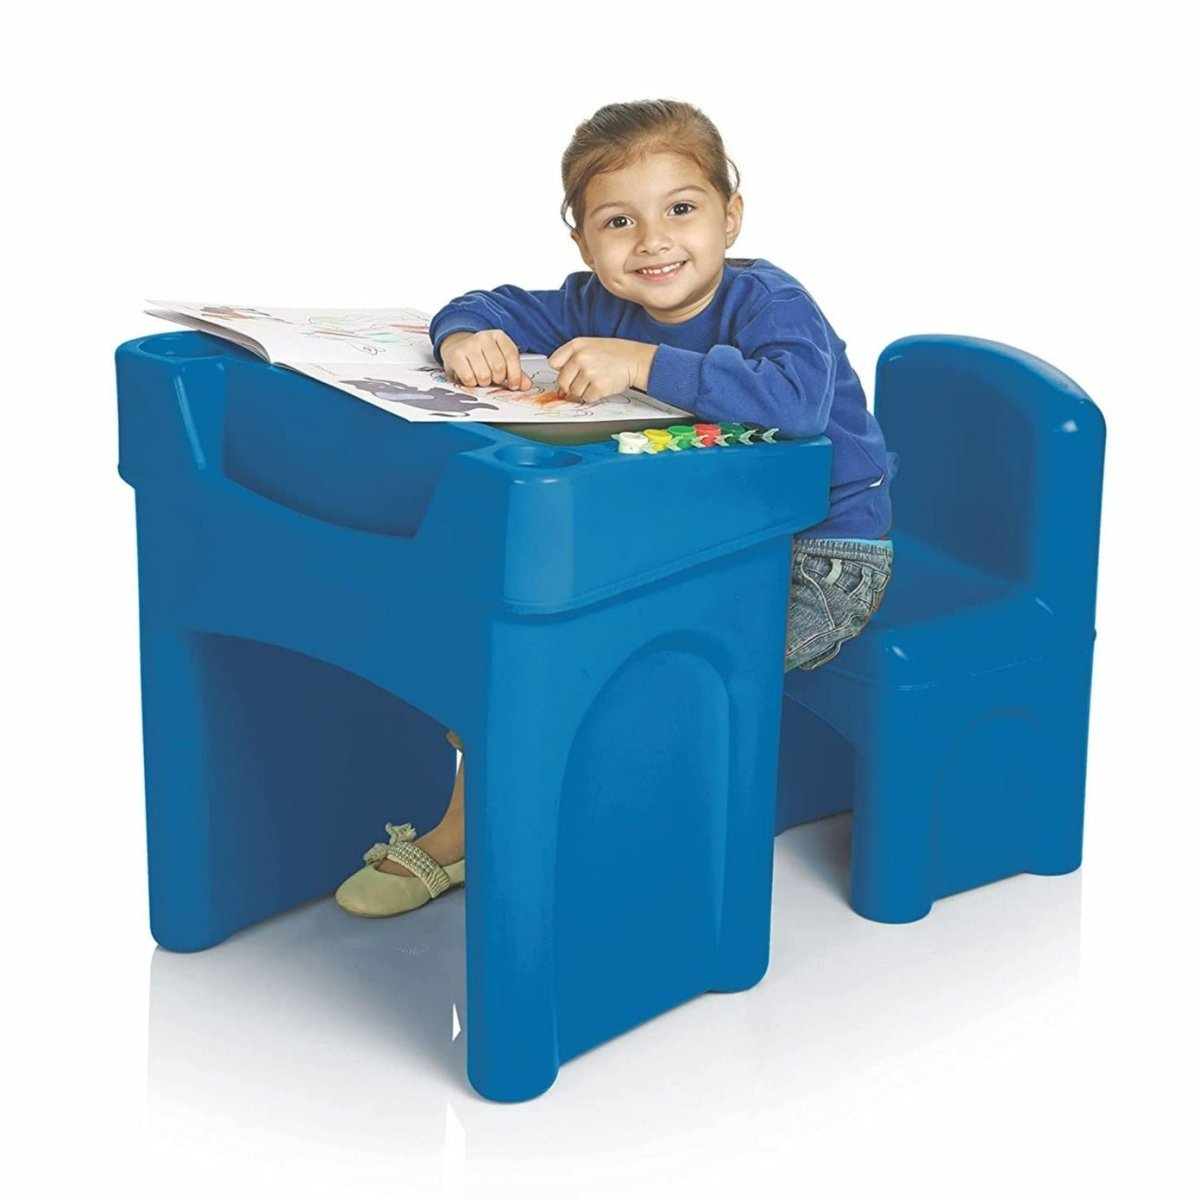 OK Play Little Master Blue Chair & Table Set for Kids - FTFF000394